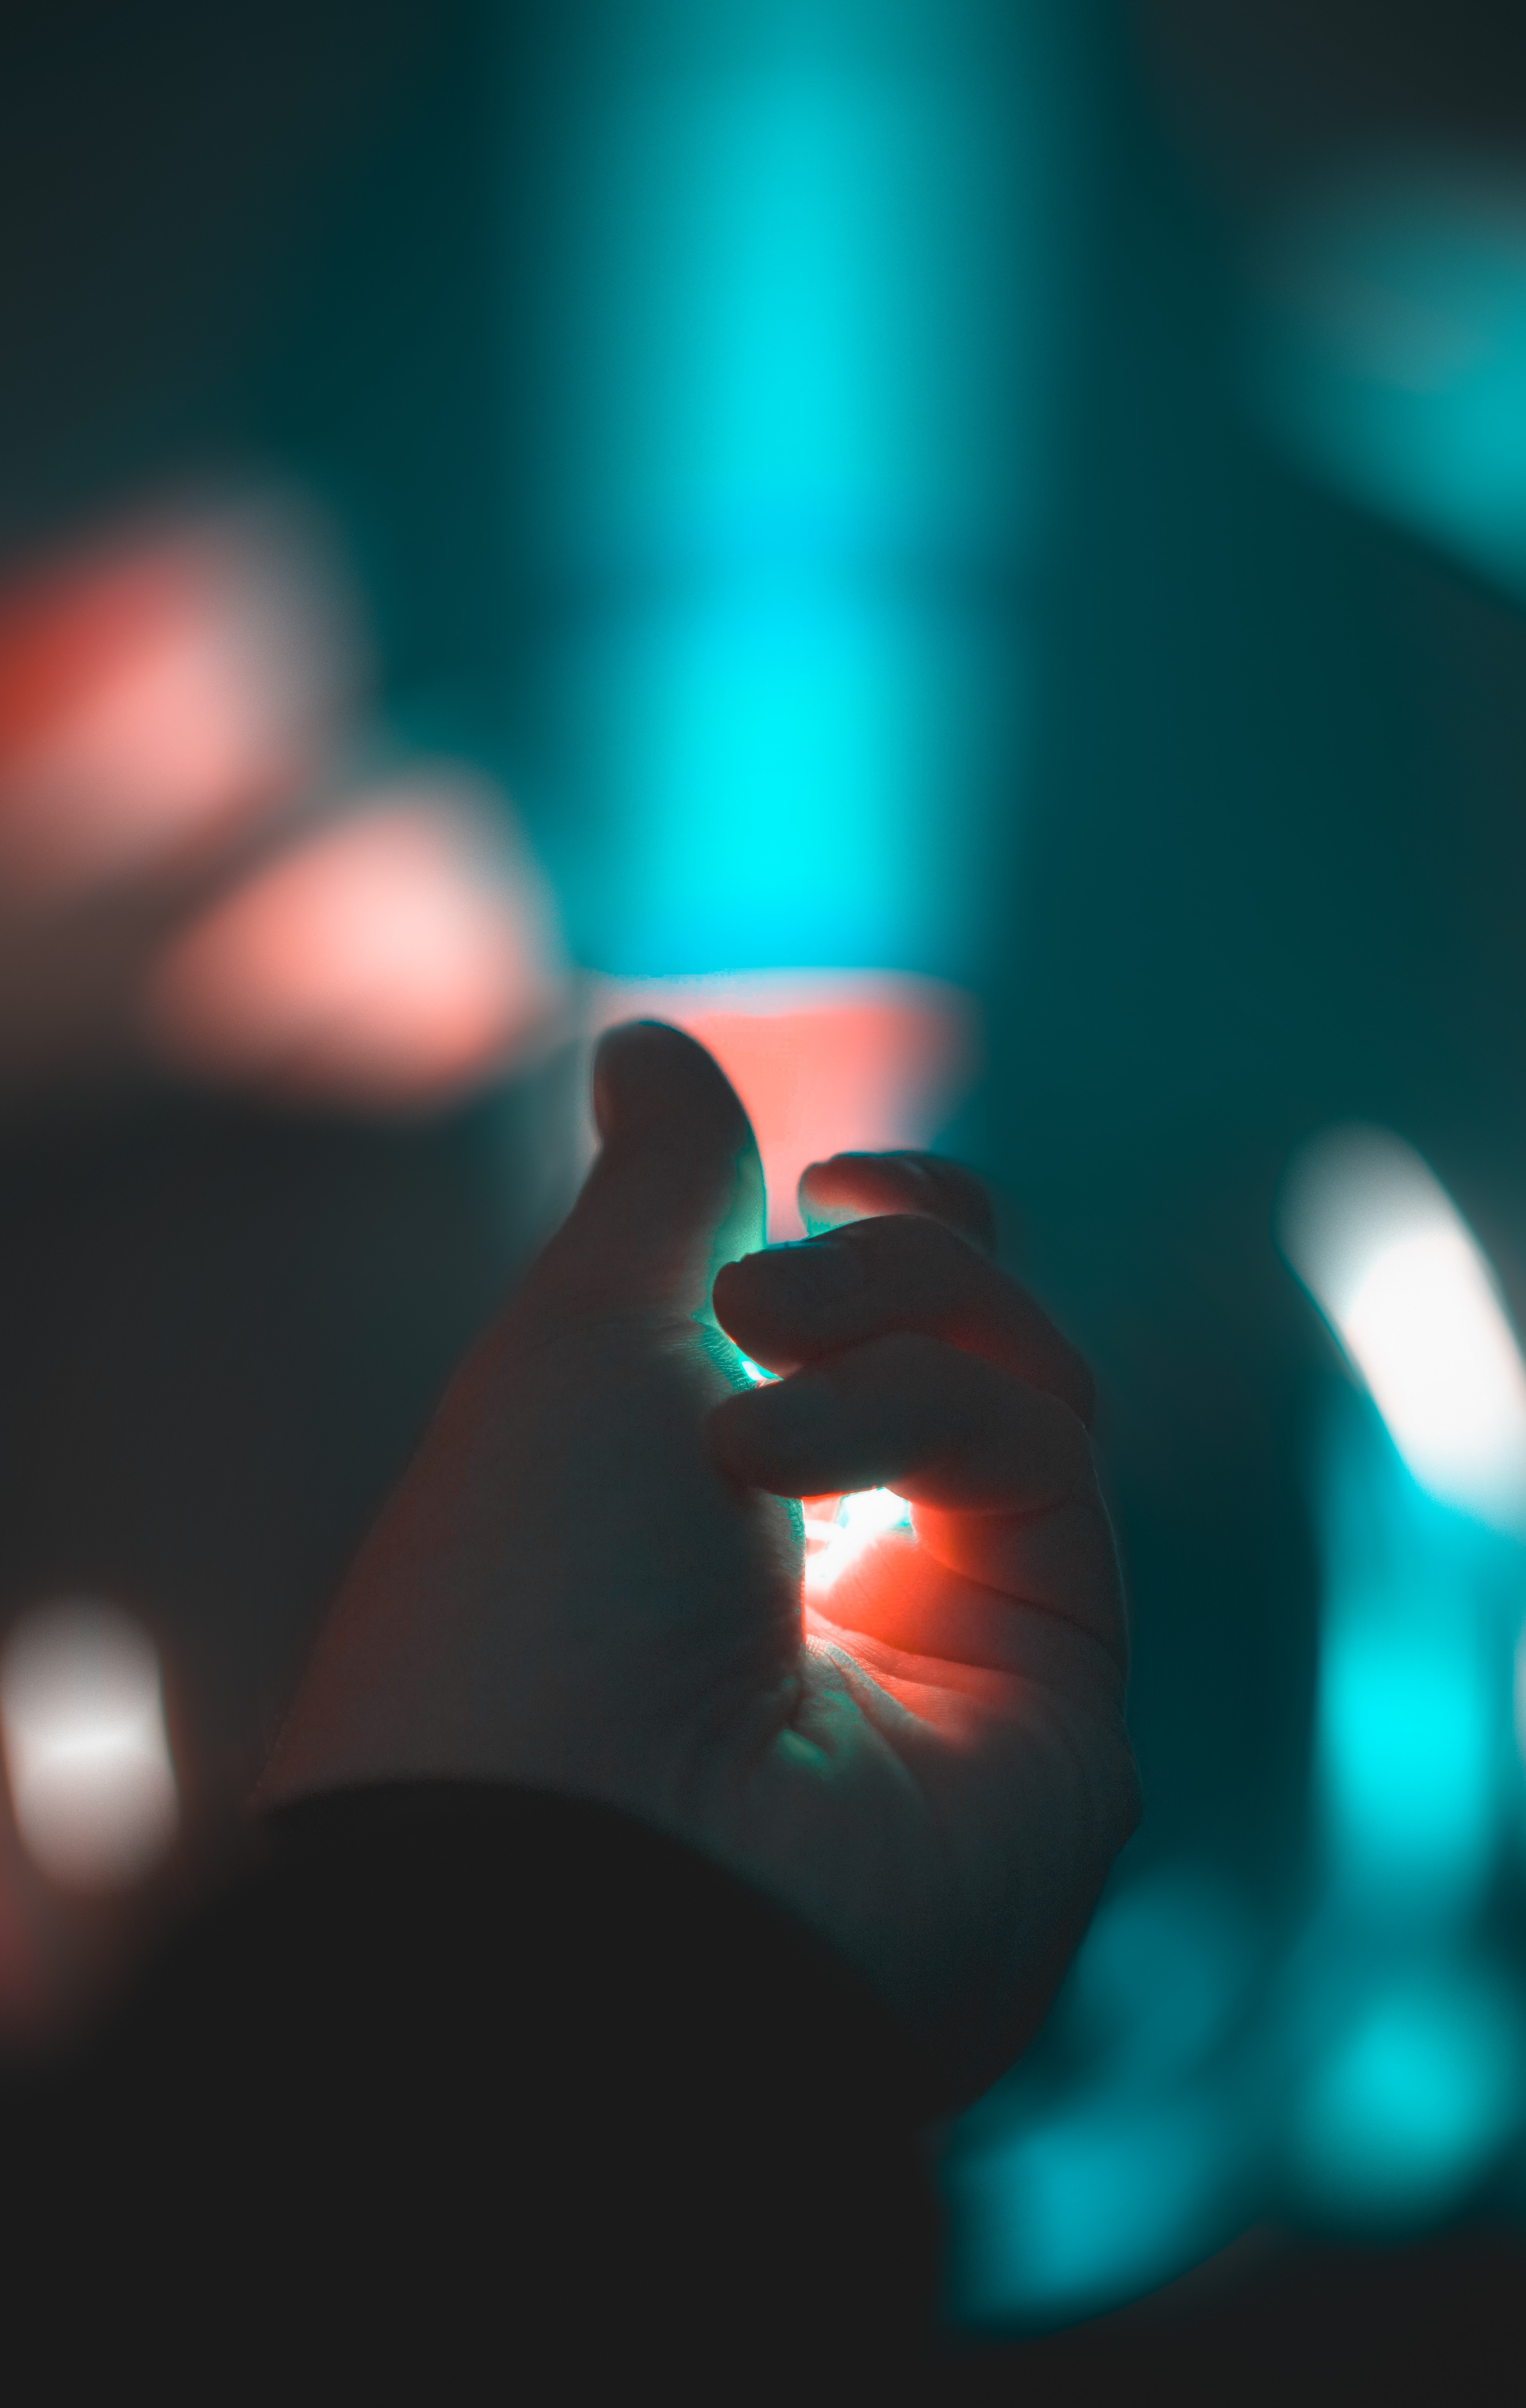 android dark, hand, miscellanea, miscellaneous, blur, smooth, fingers